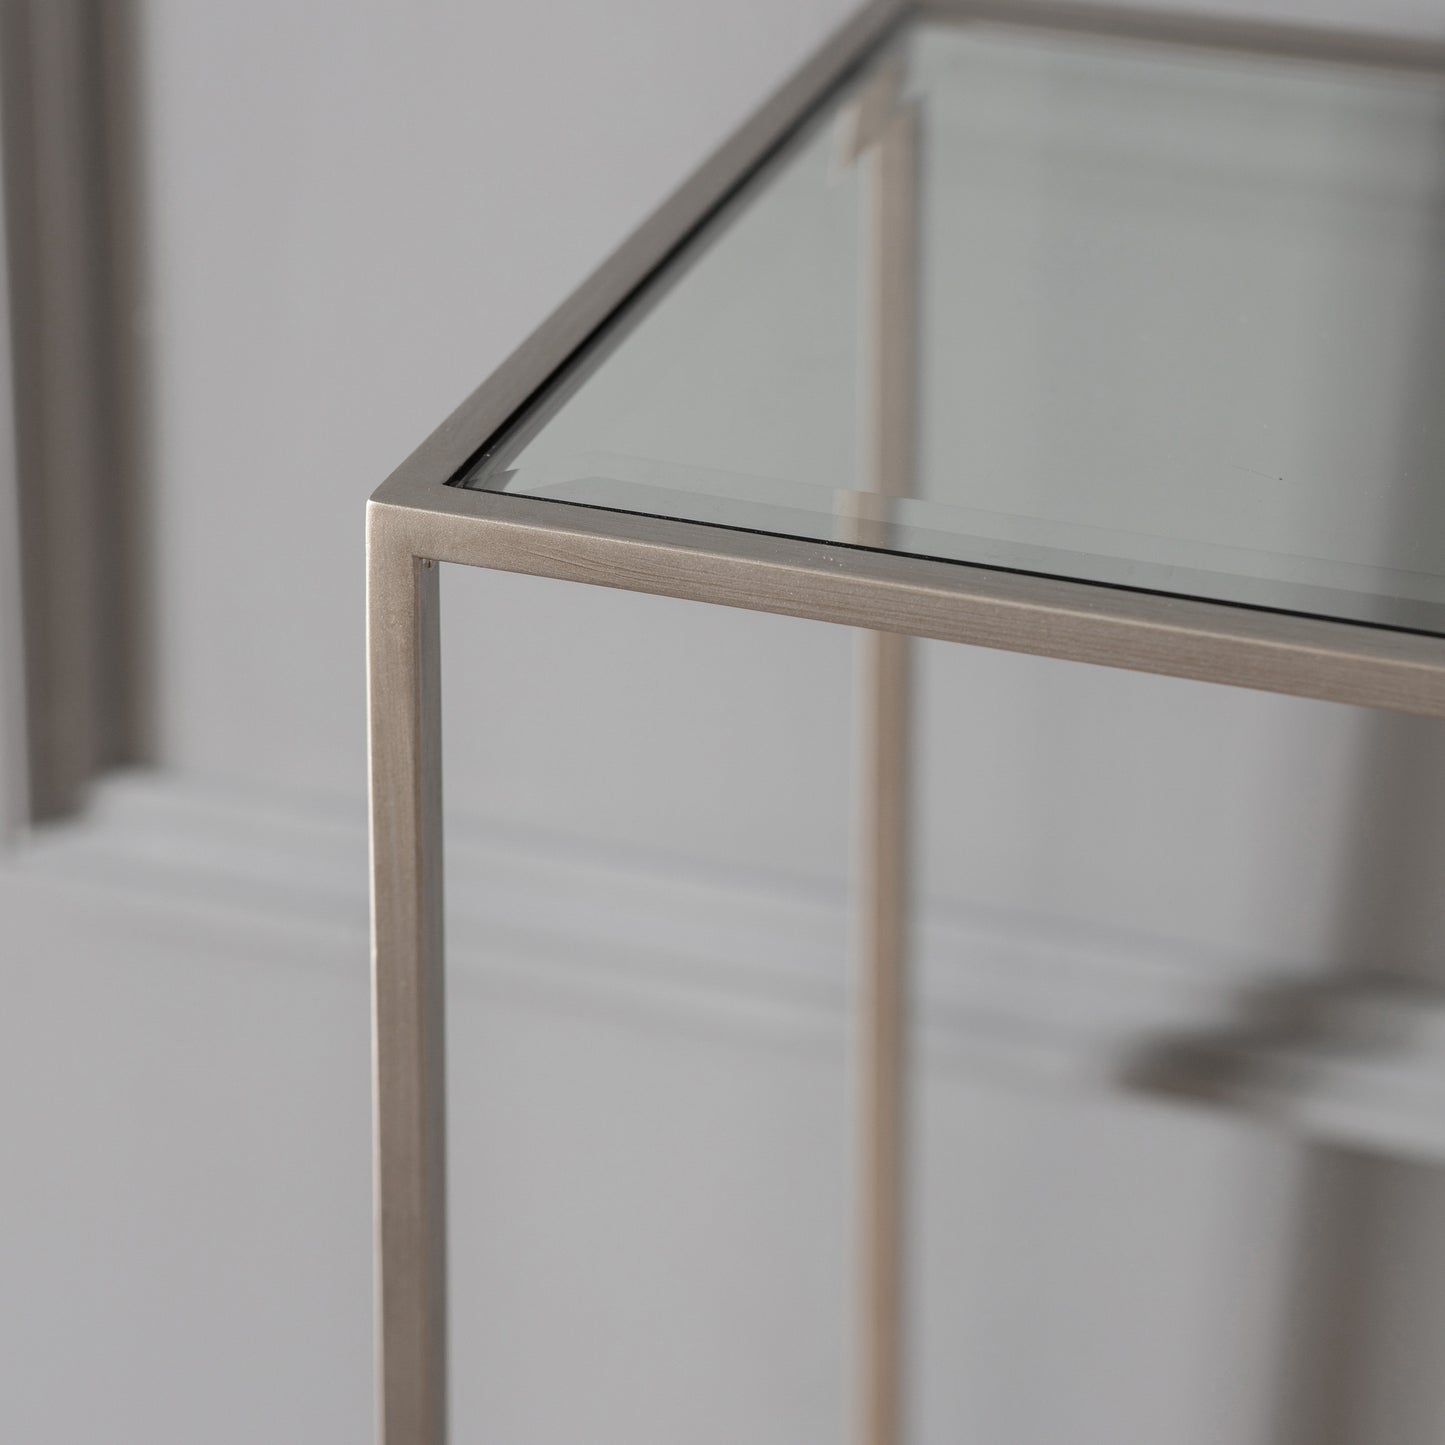 A silver Console Table with a metal frame for home furniture by Kikiathome.co.uk.